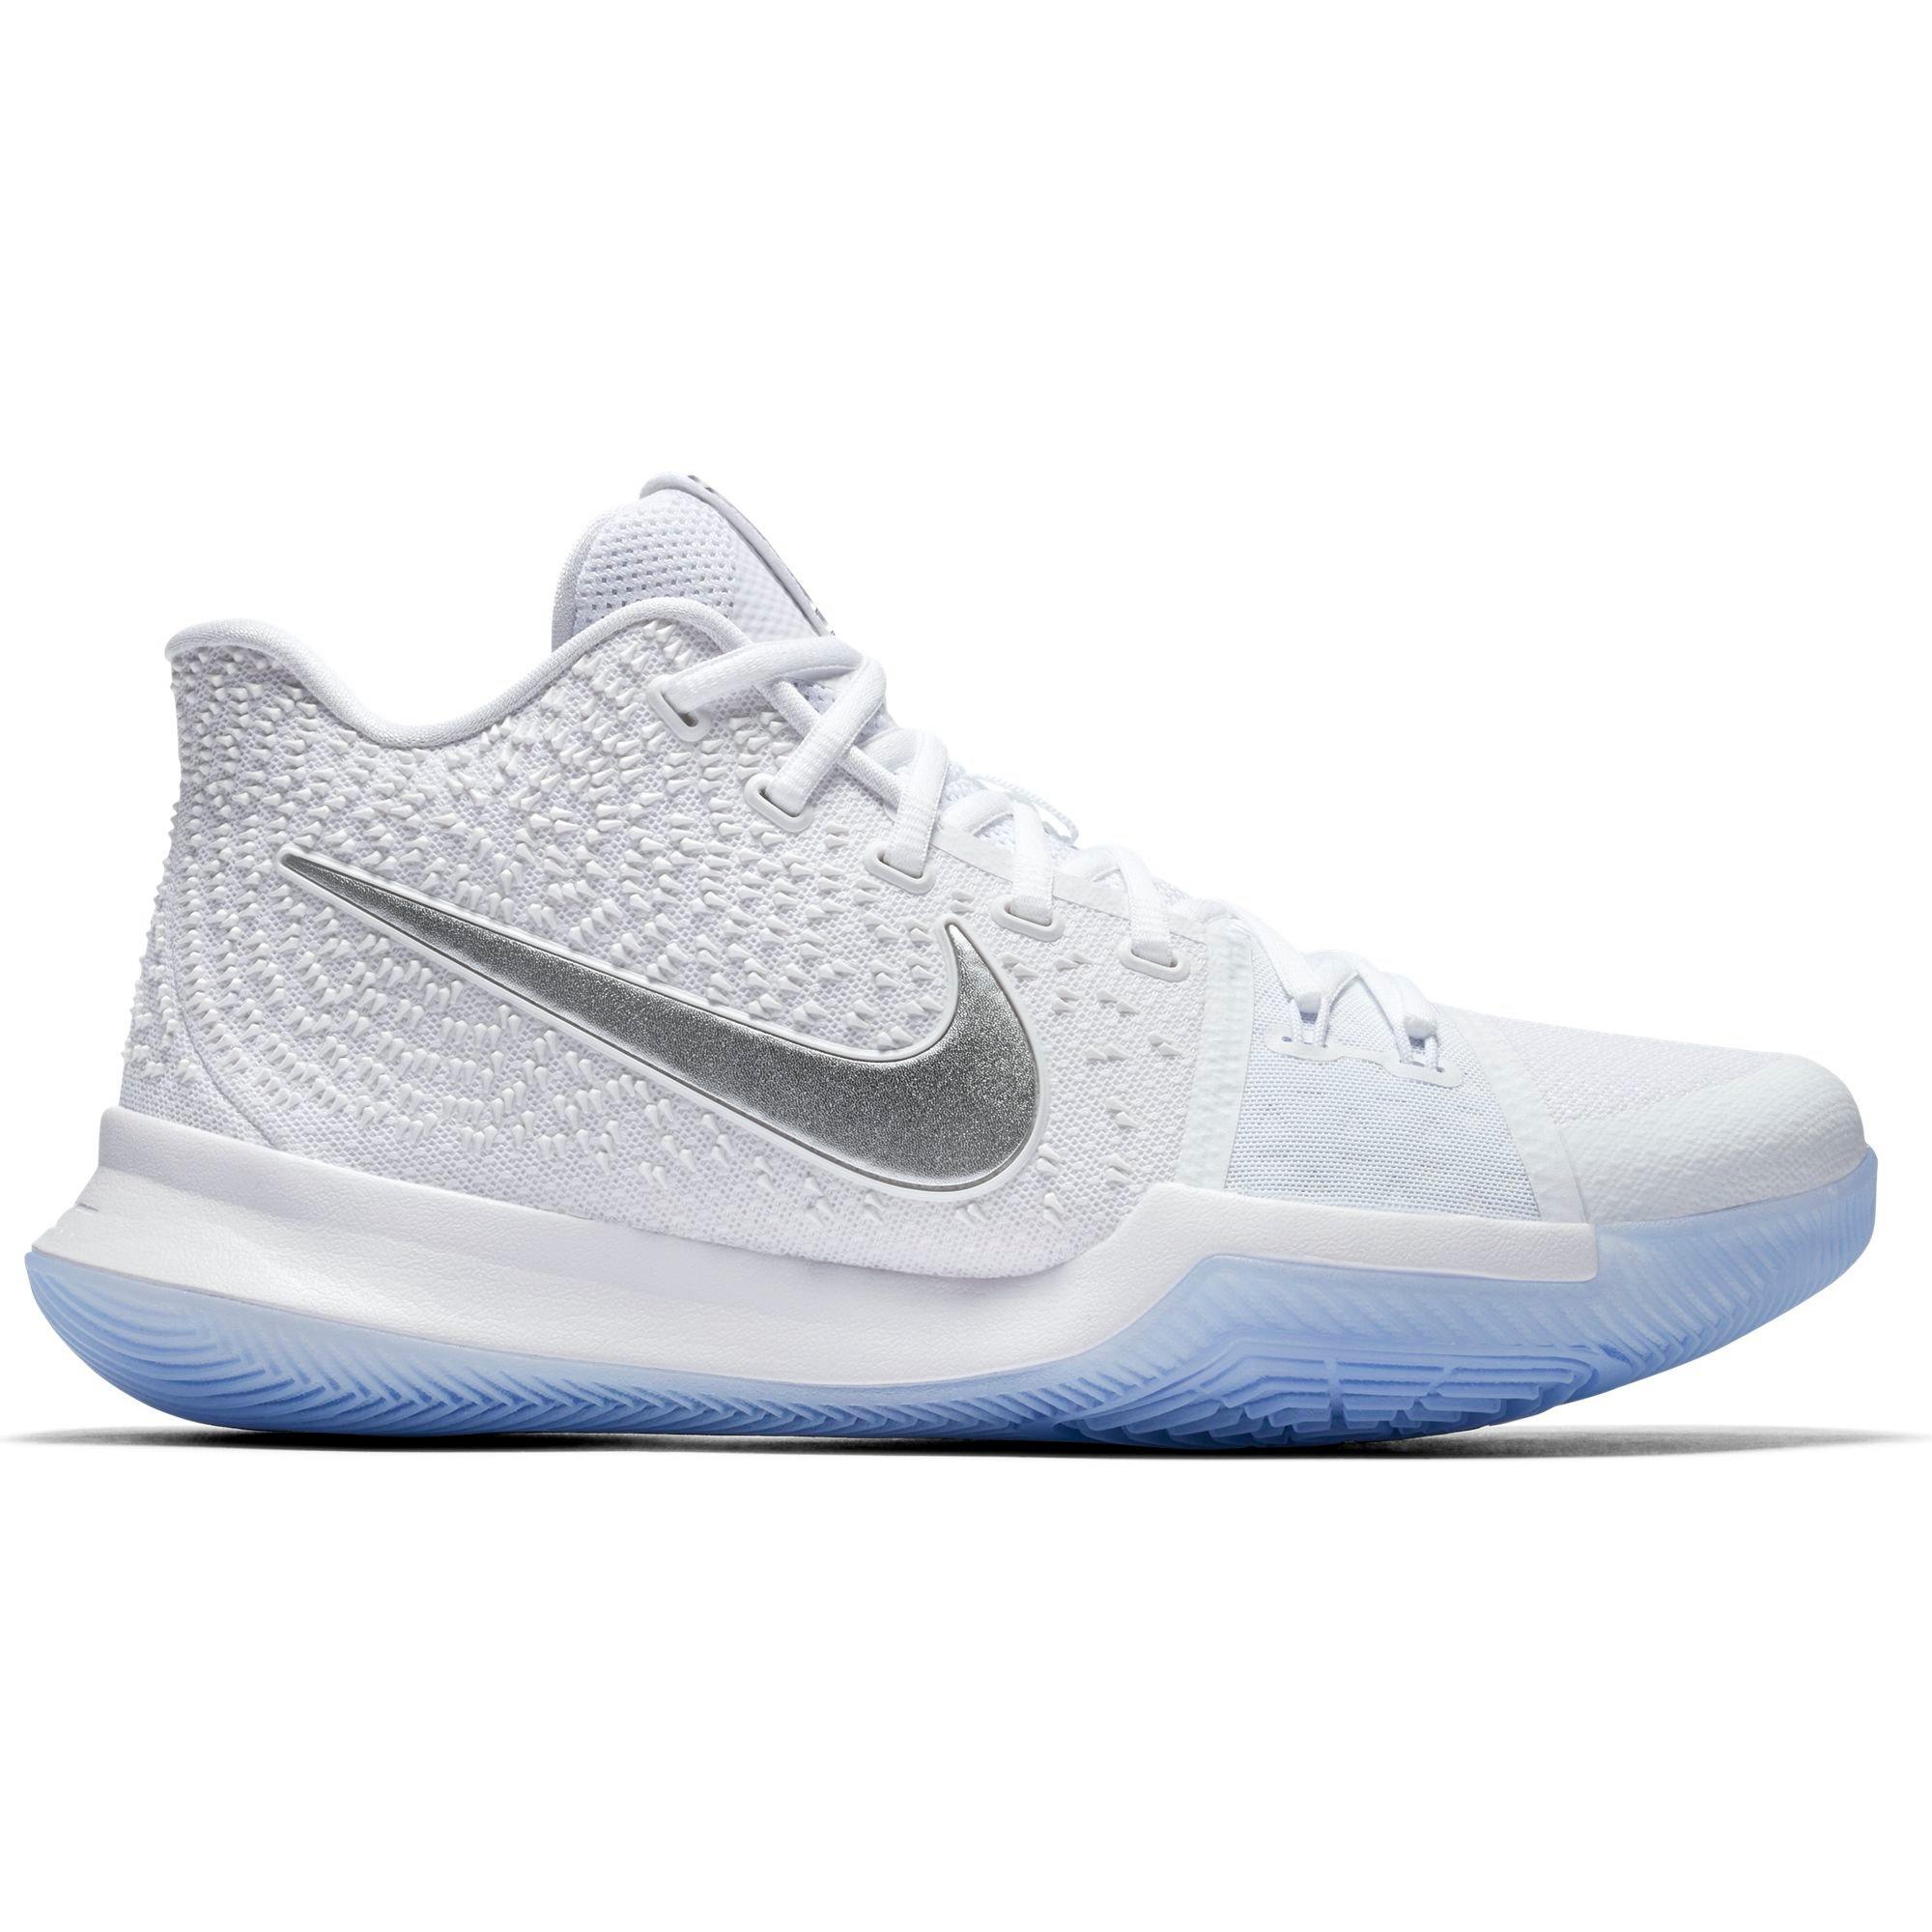 kyrie white shoes